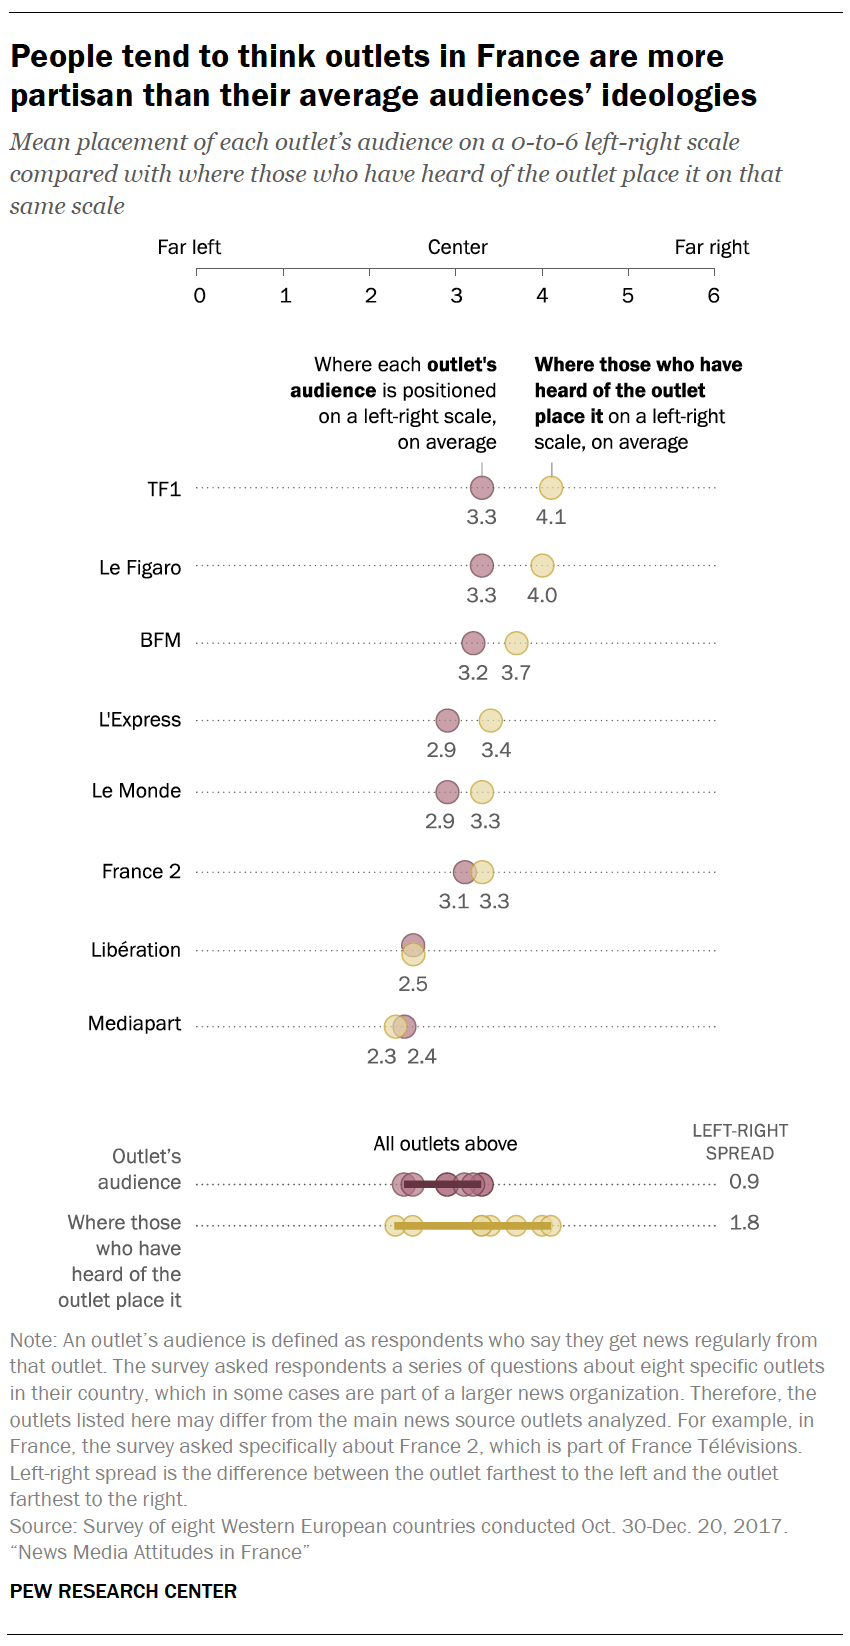 People tend to think outlets in France are more partisan than their average audiences' ideologies